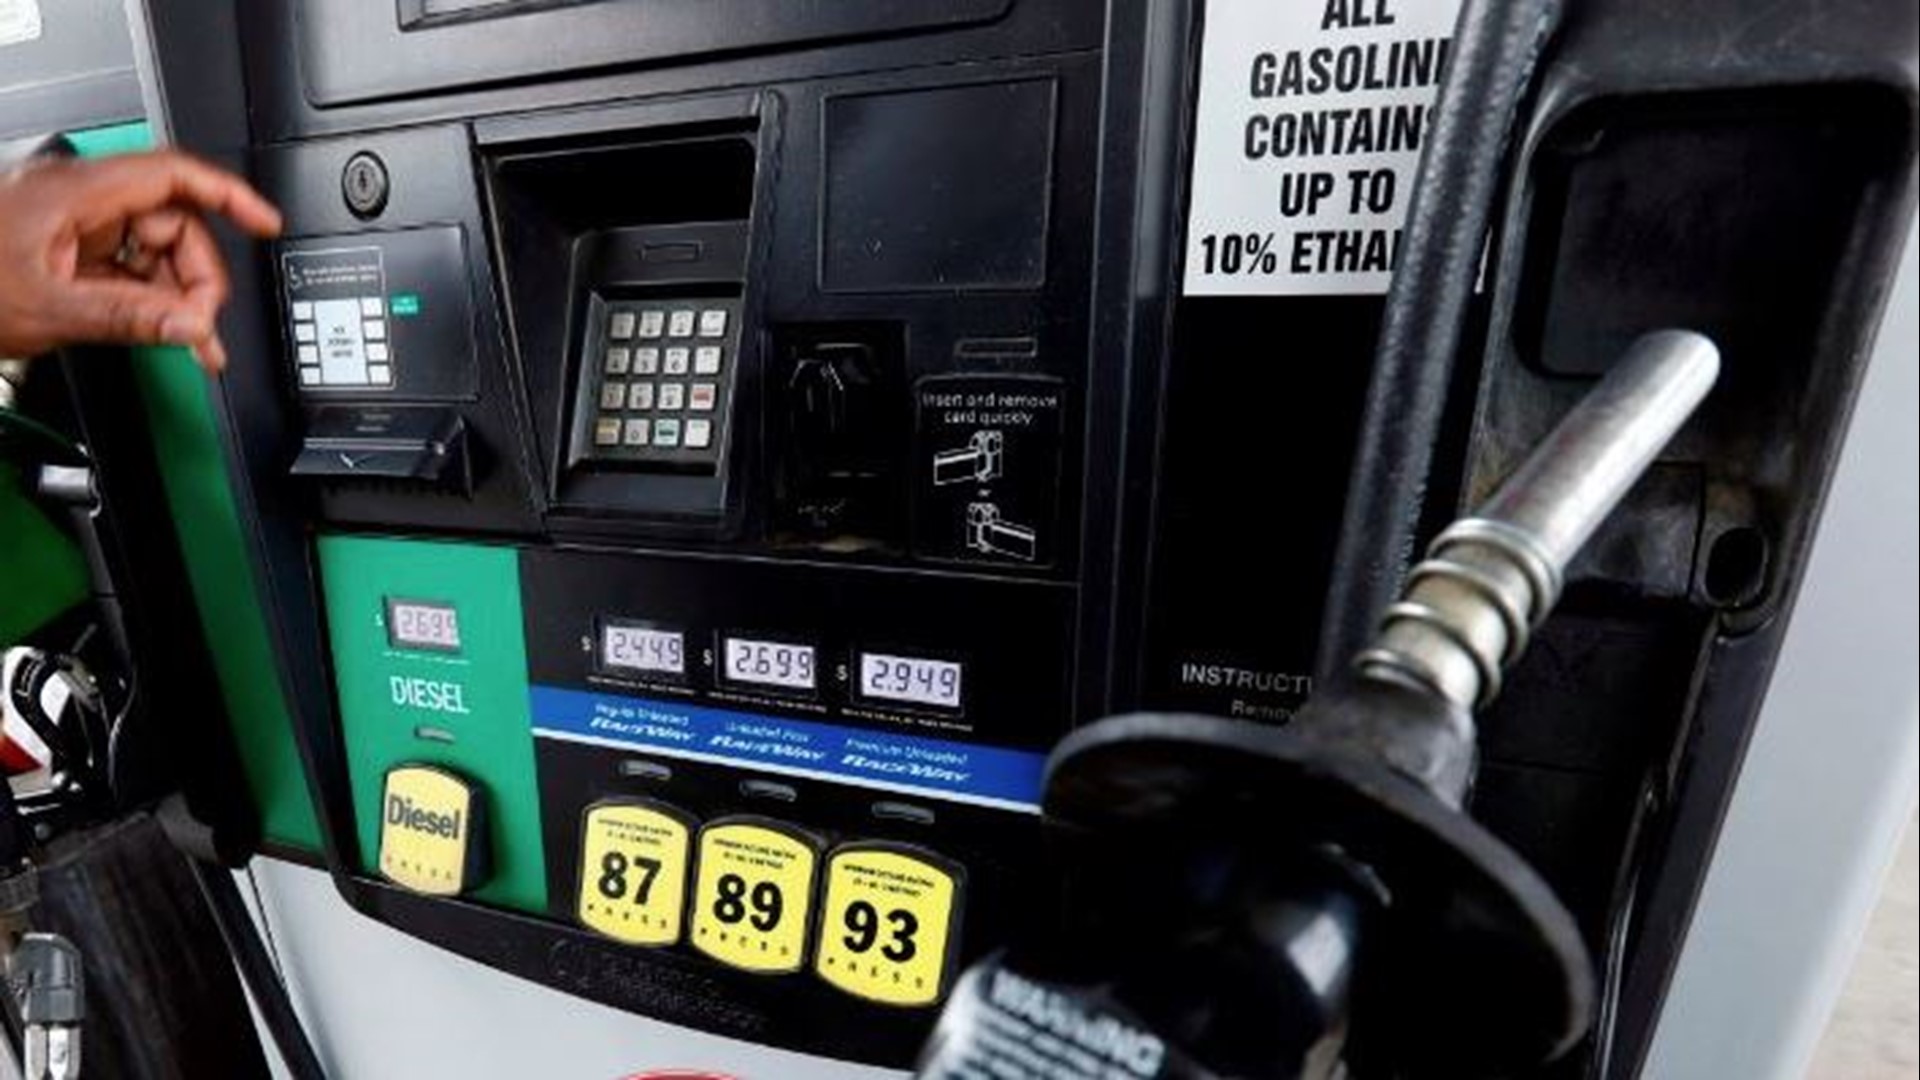 Gasbuddy’s head of petroleum analysis Patrick DeHaan said there are a couple reasons.